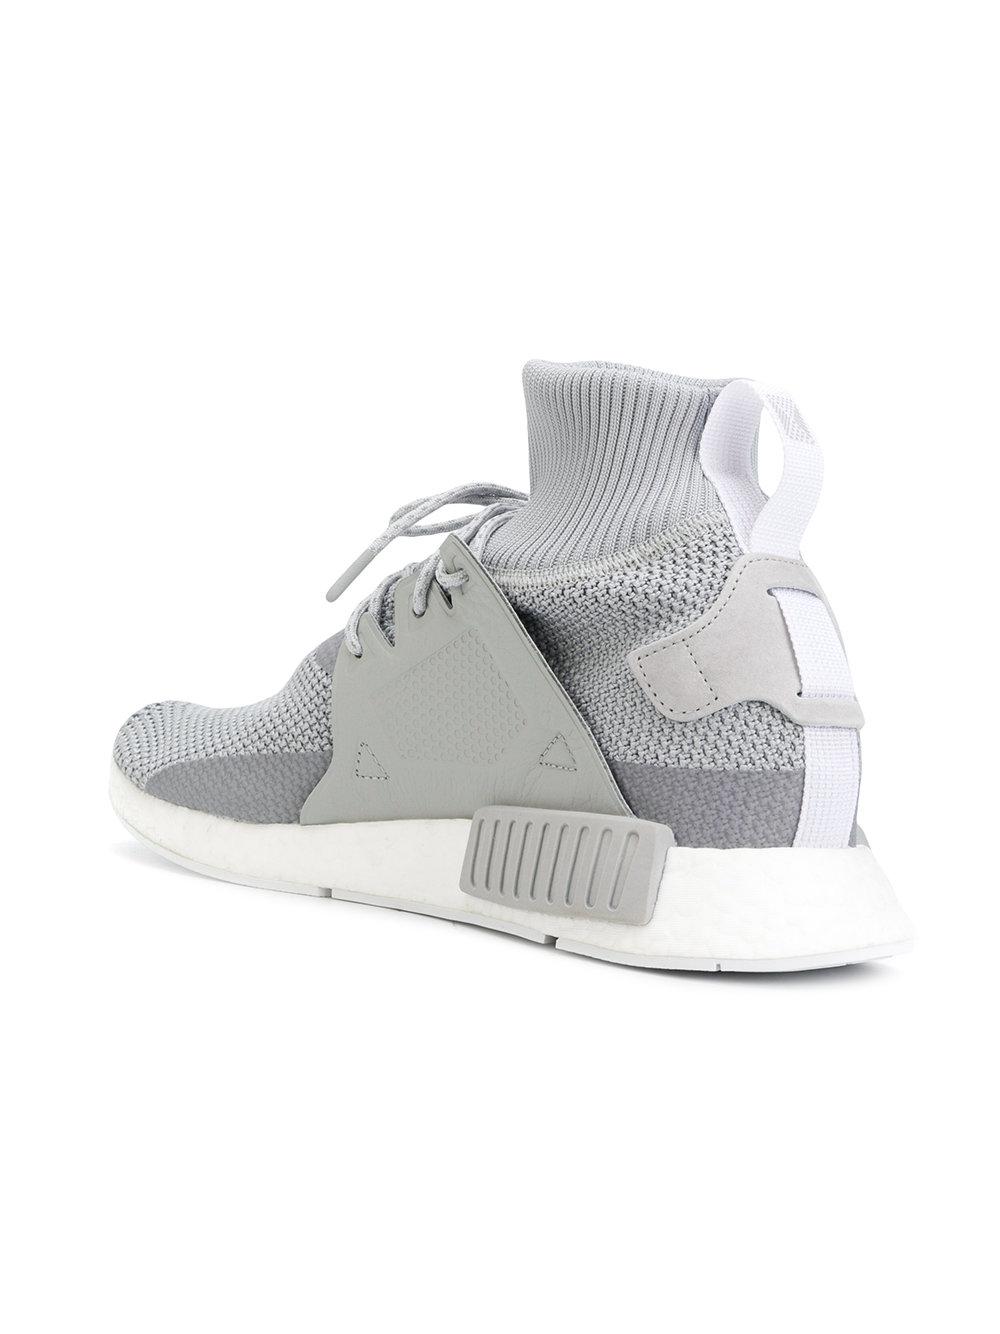 Adidas nmd xr1 shoes gray red style file